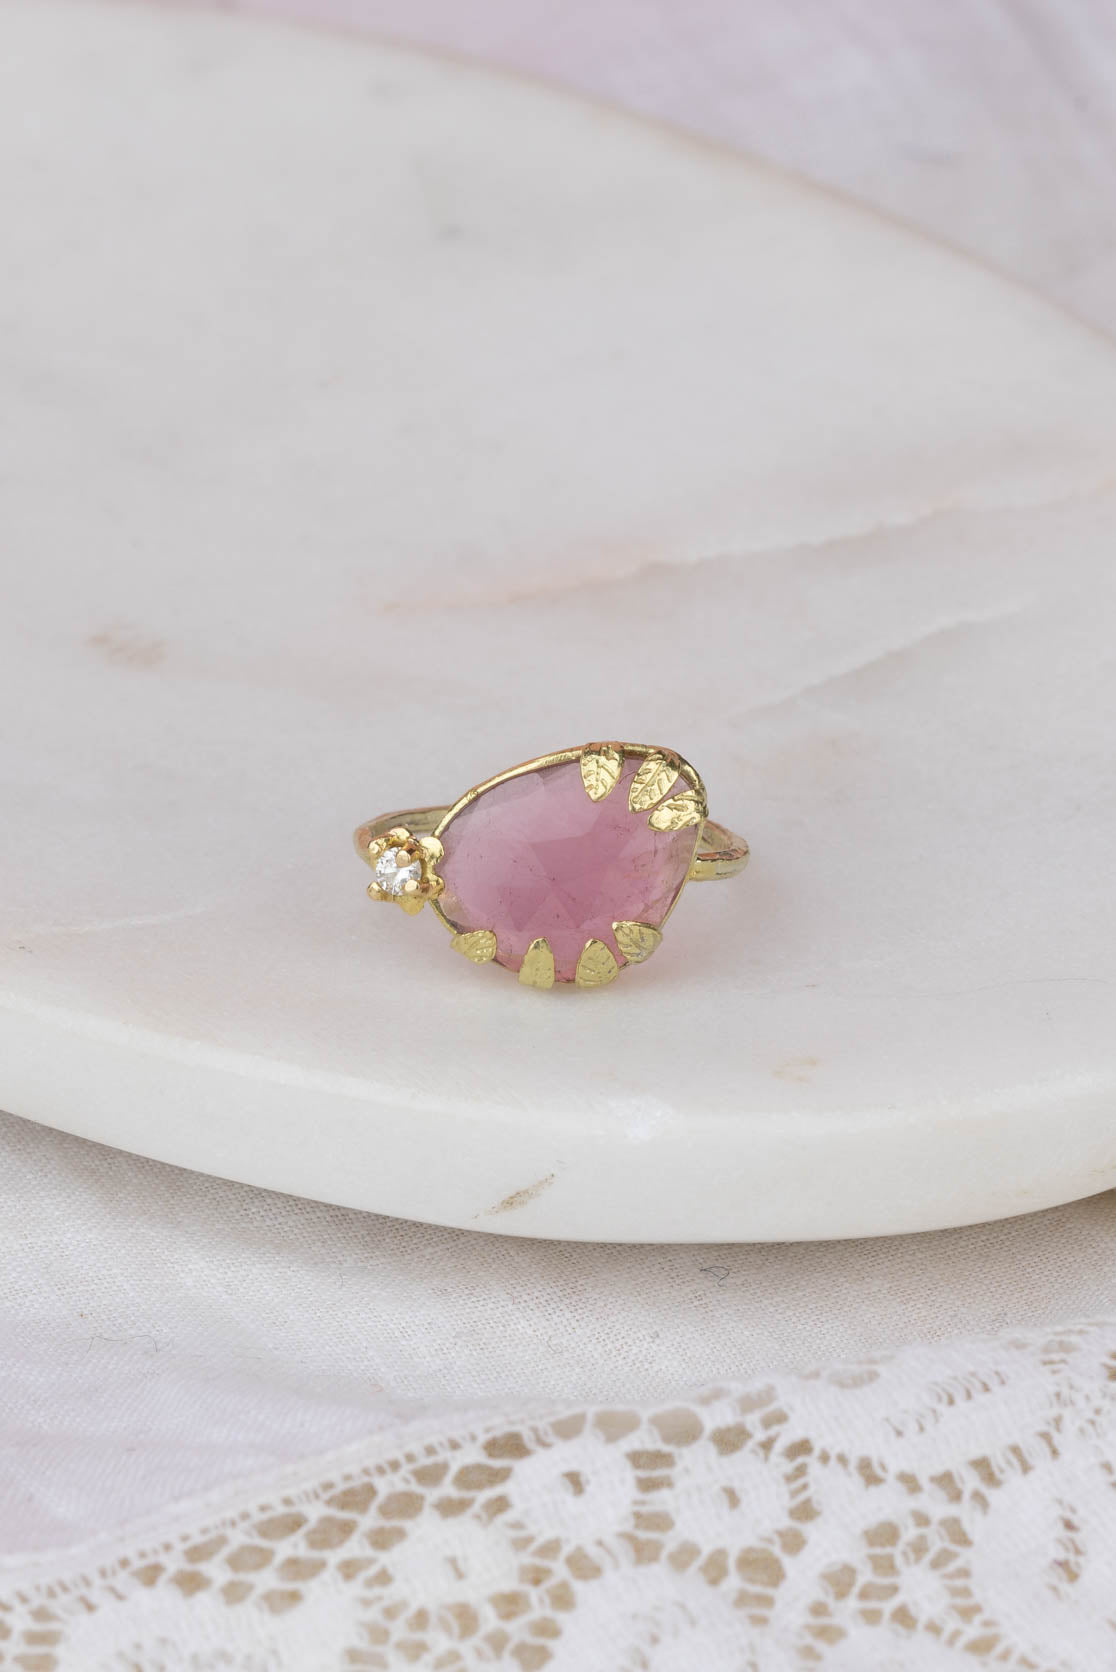 One-of-a-kind 18ct Gold, Pink Tourmaline And Diamond Ring